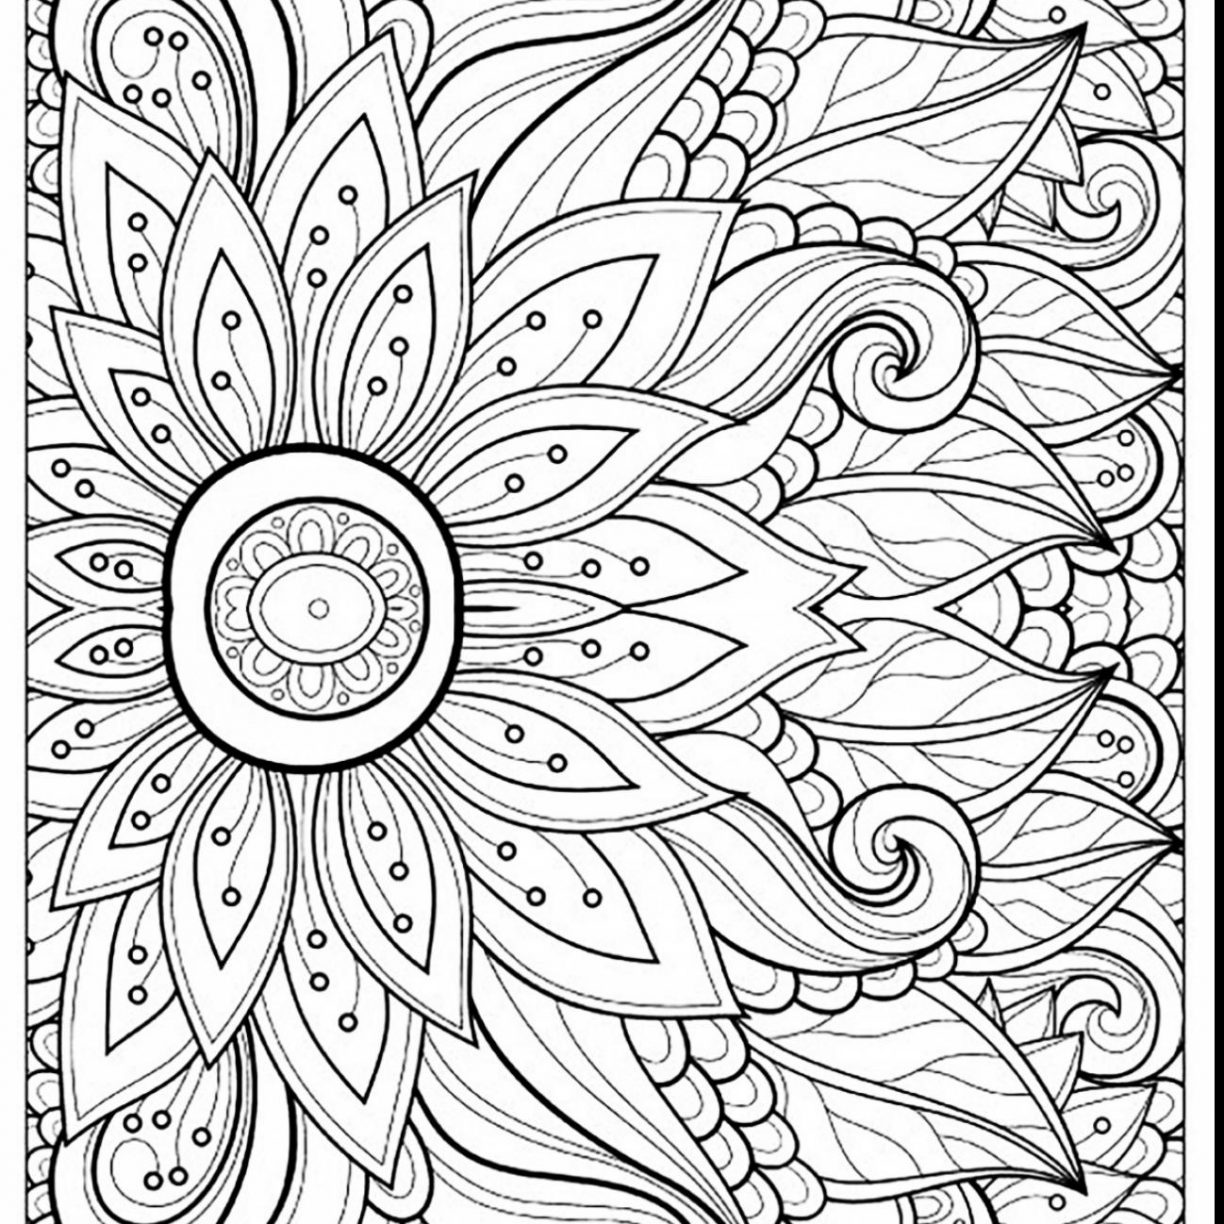 Difficult Printable Coloring Pages For Adults at GetColorings.com - Free printable colorings ...